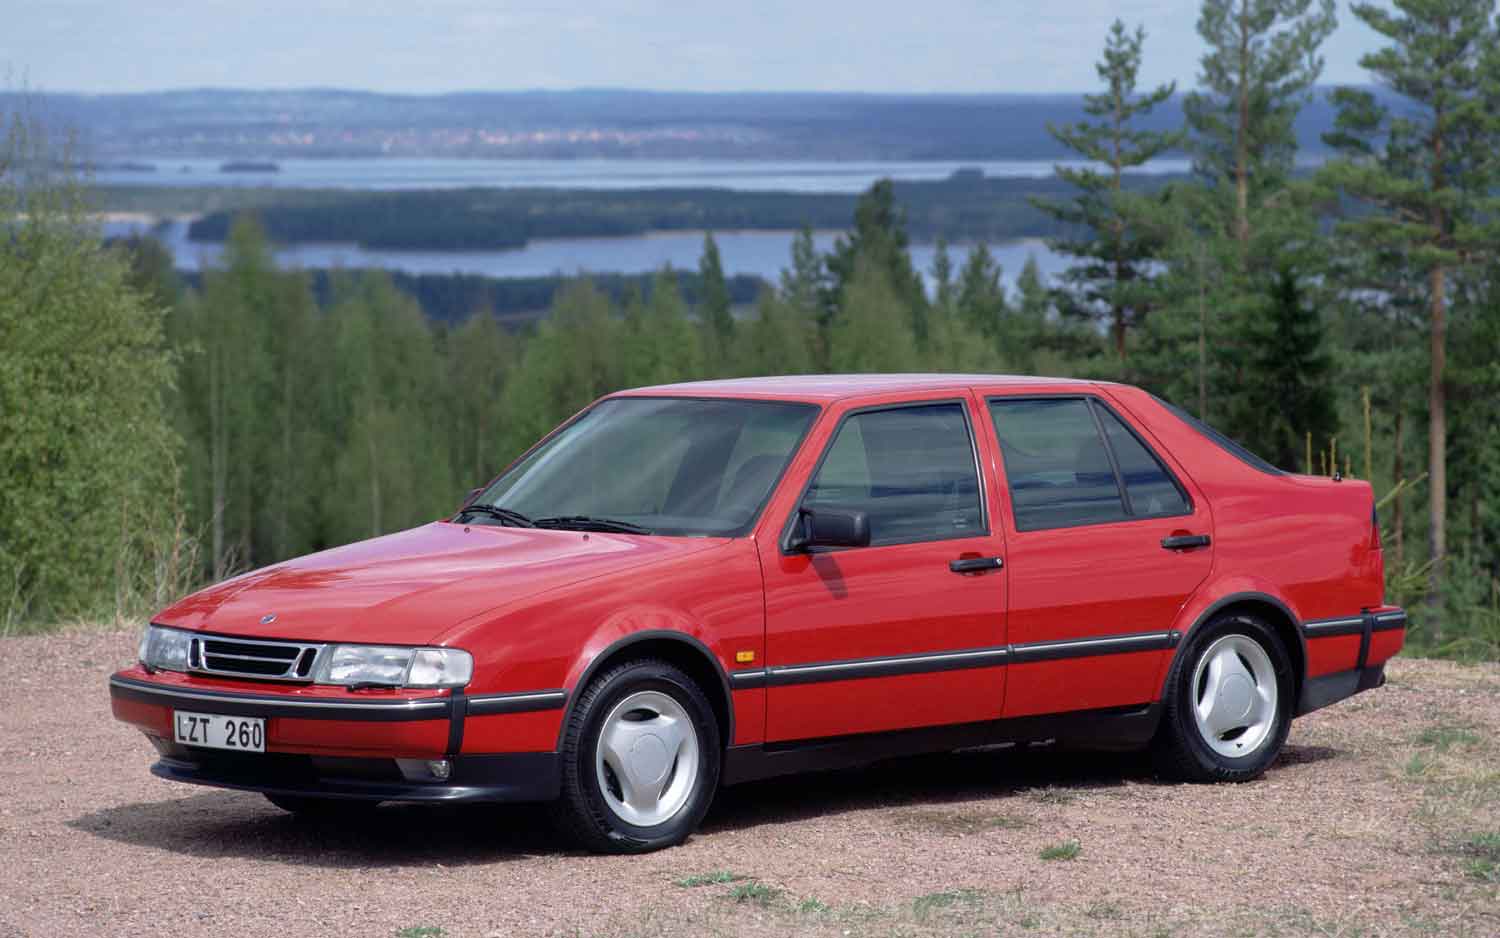 1997-Saab-9000-CSE-front-side-view #149347 - MotorTrend WOT